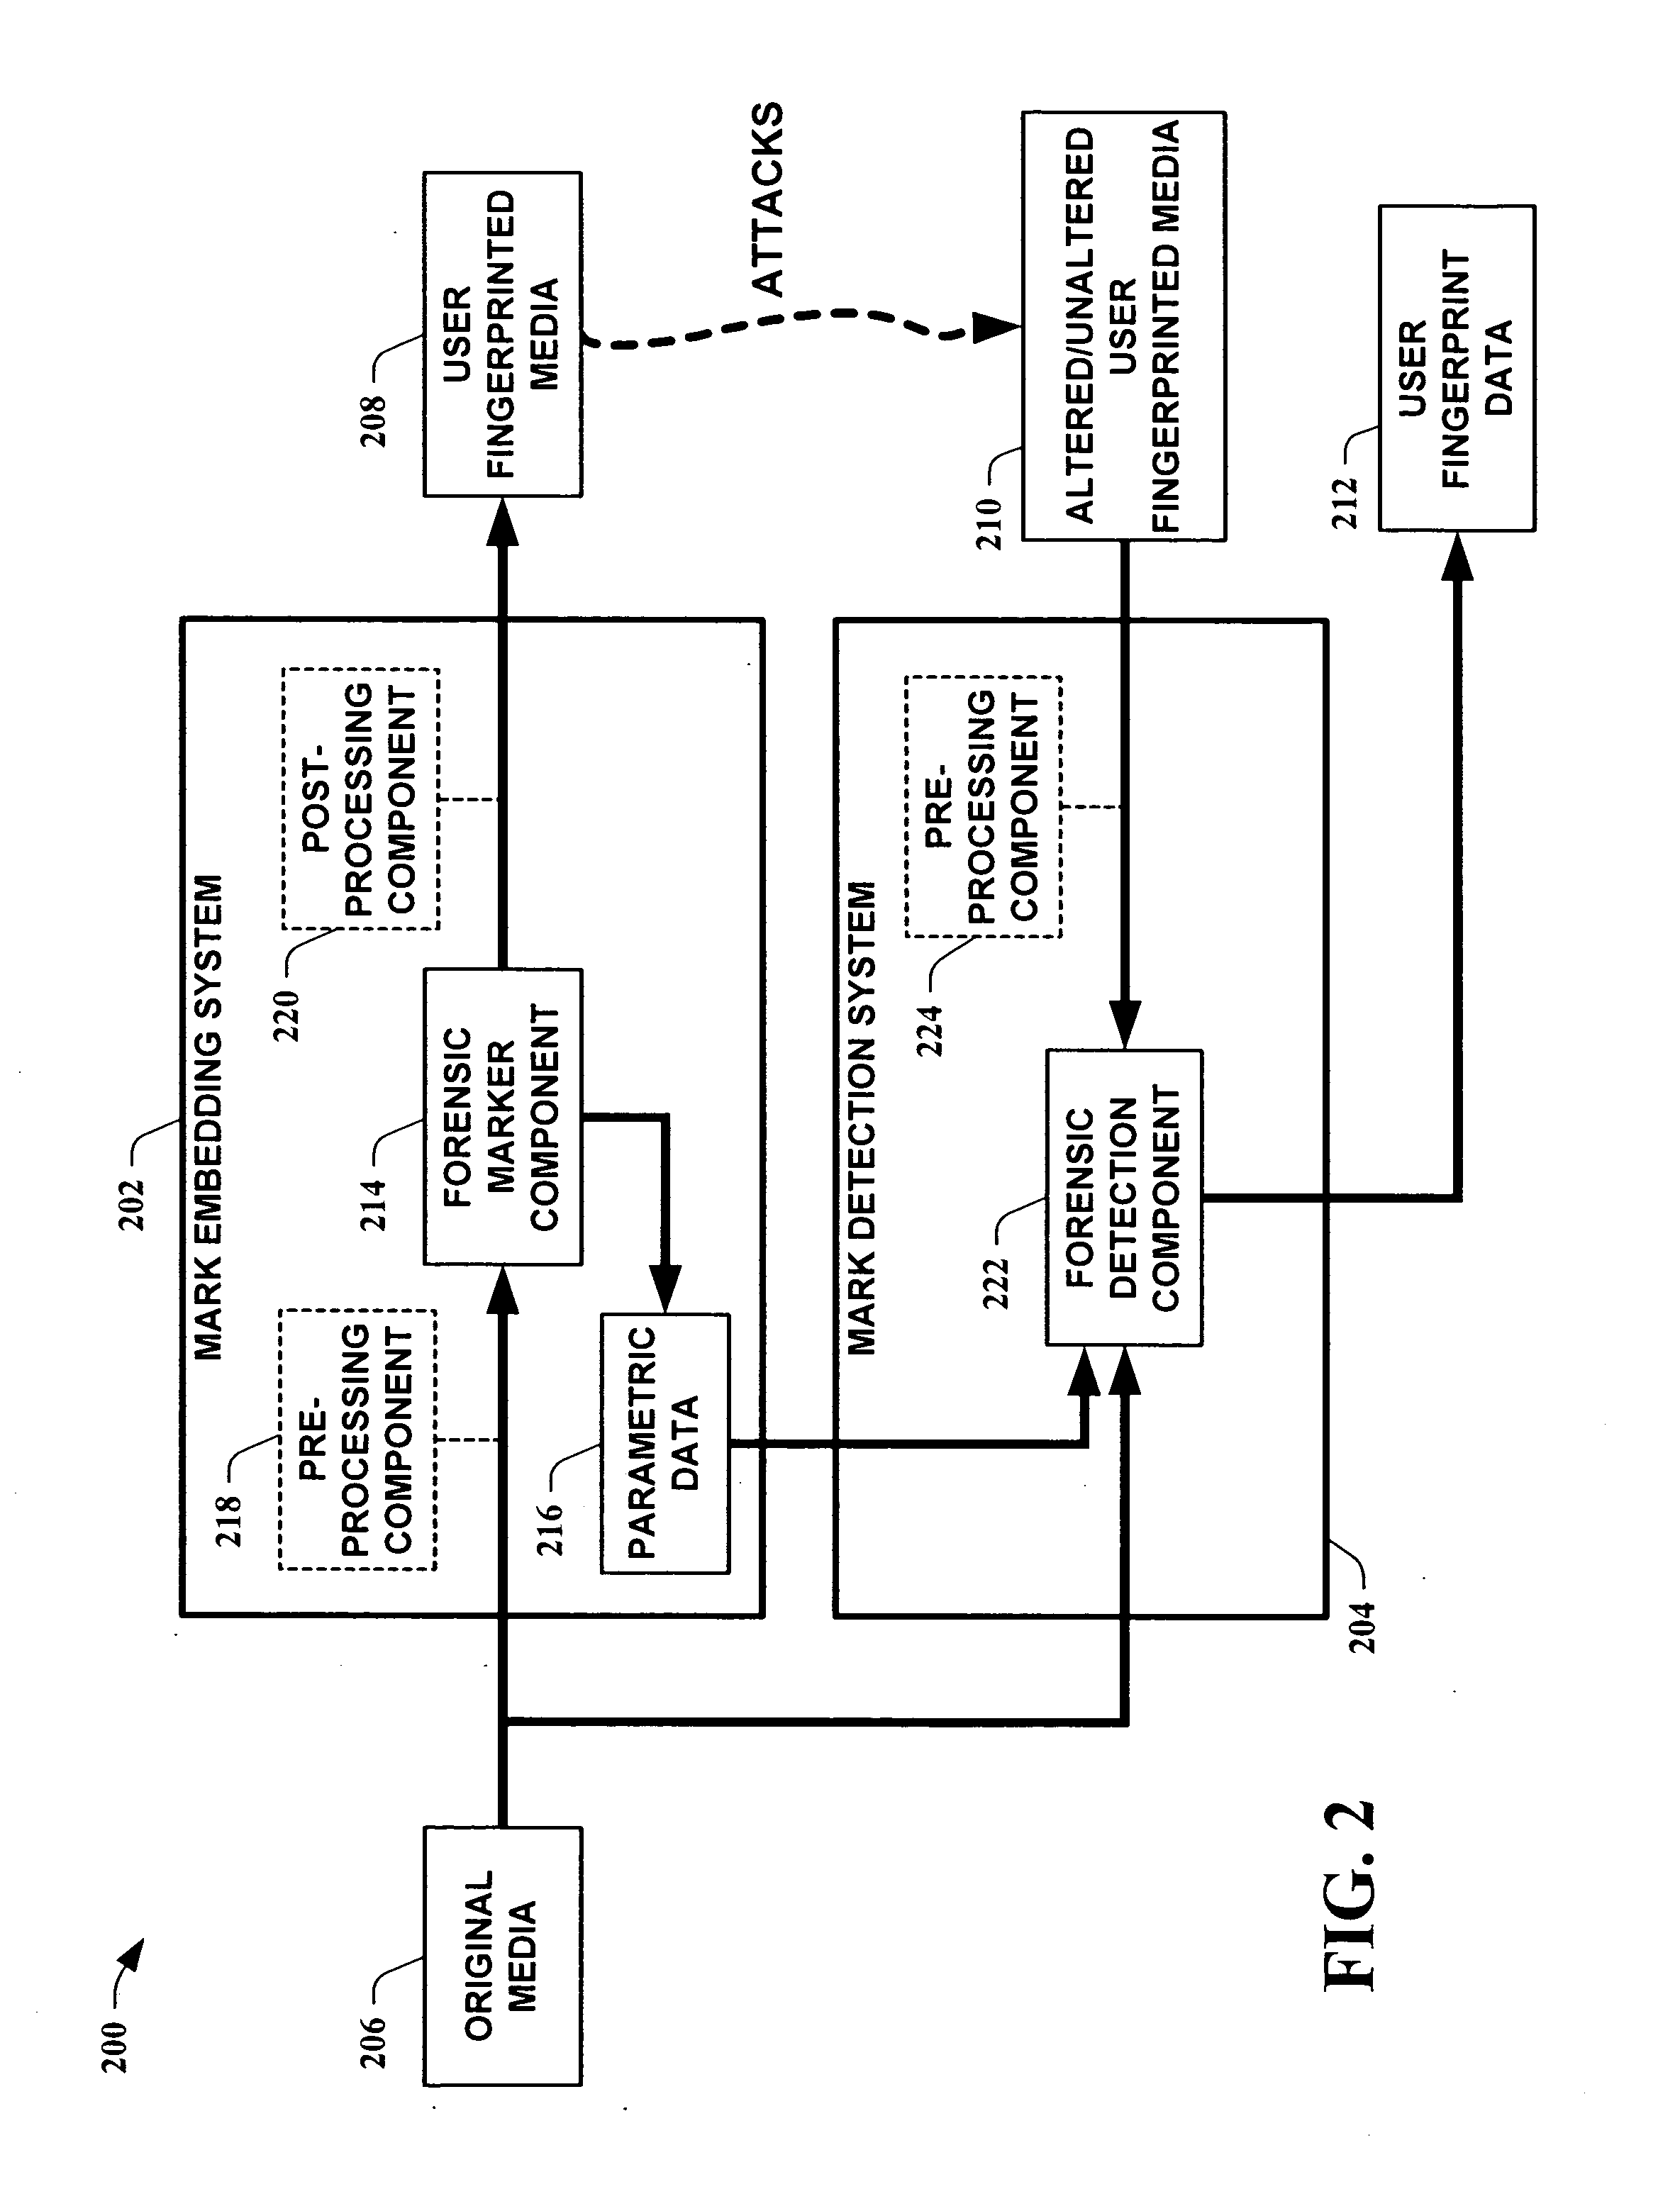 Systems and methods for embedding media forensic identification markings